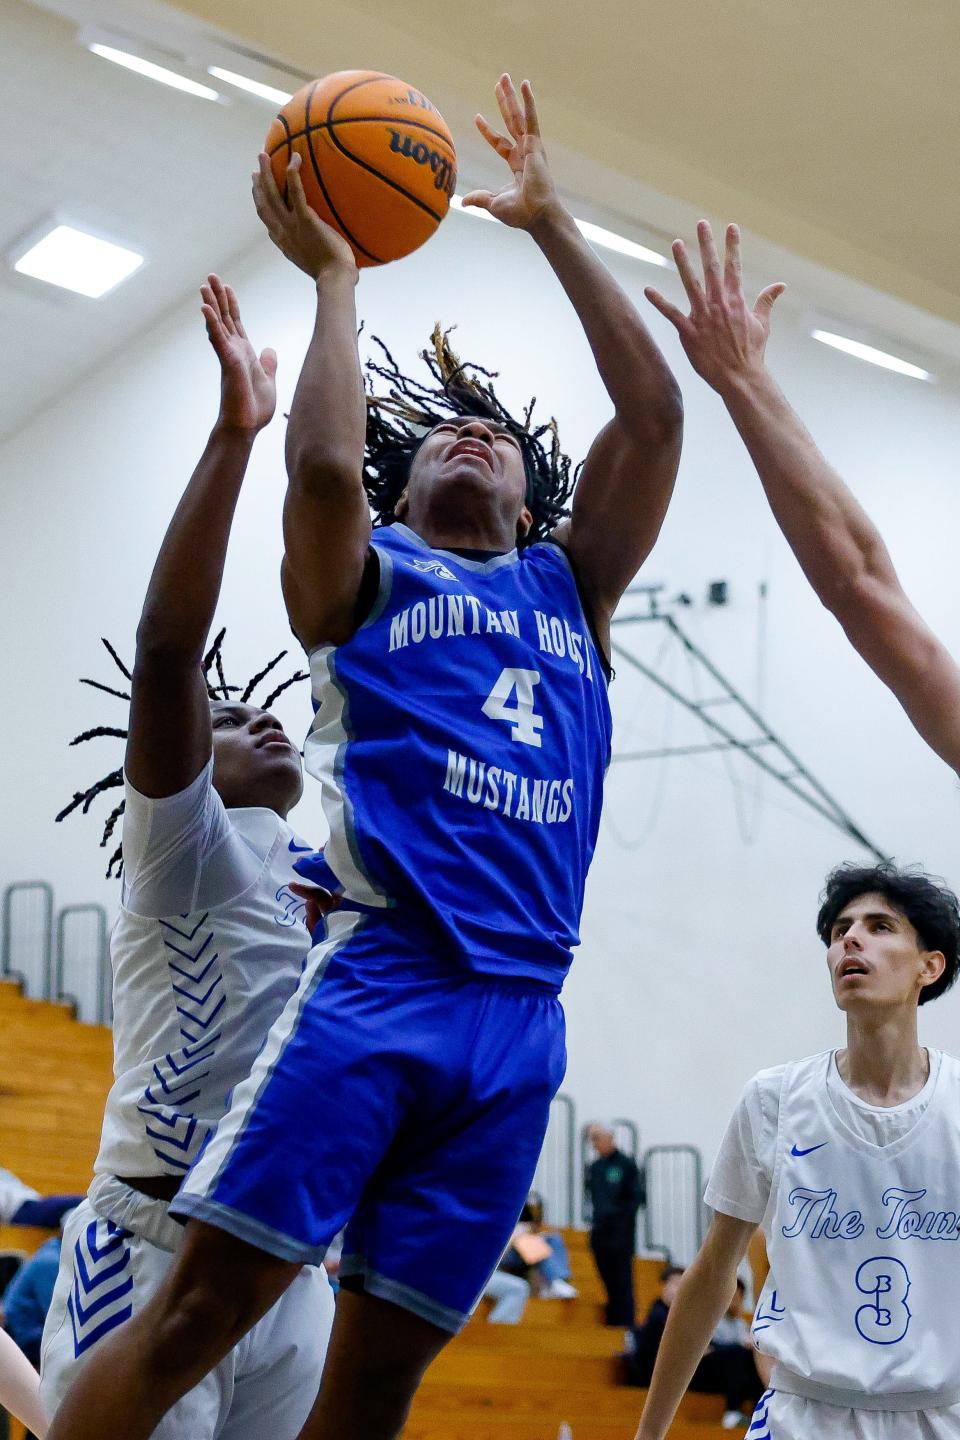 Mountain House High’s Cedrick Major(4) fights down low during its 62-41 win against Atwater High at the Super Saturday Showcase event, held at Blanchard Gymnasium on the Delta College campus in Stockton, CA